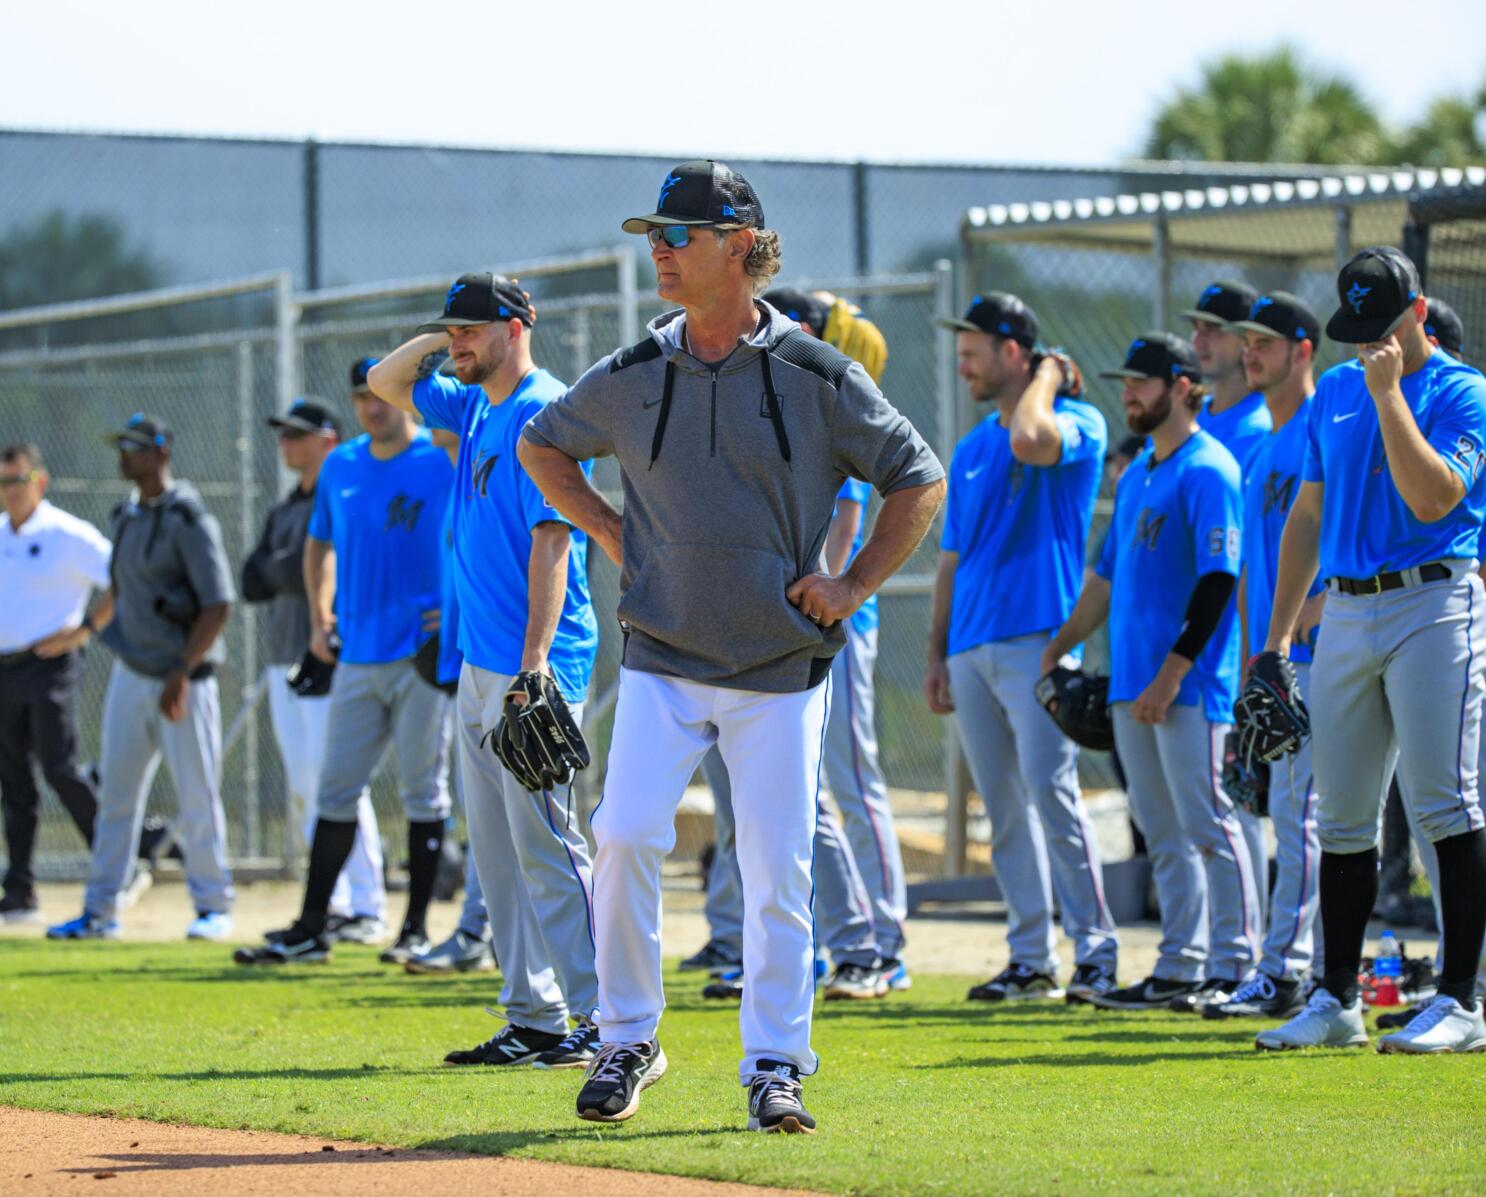 Is it time to question Don Mattingly as the Miami Marlins manager?